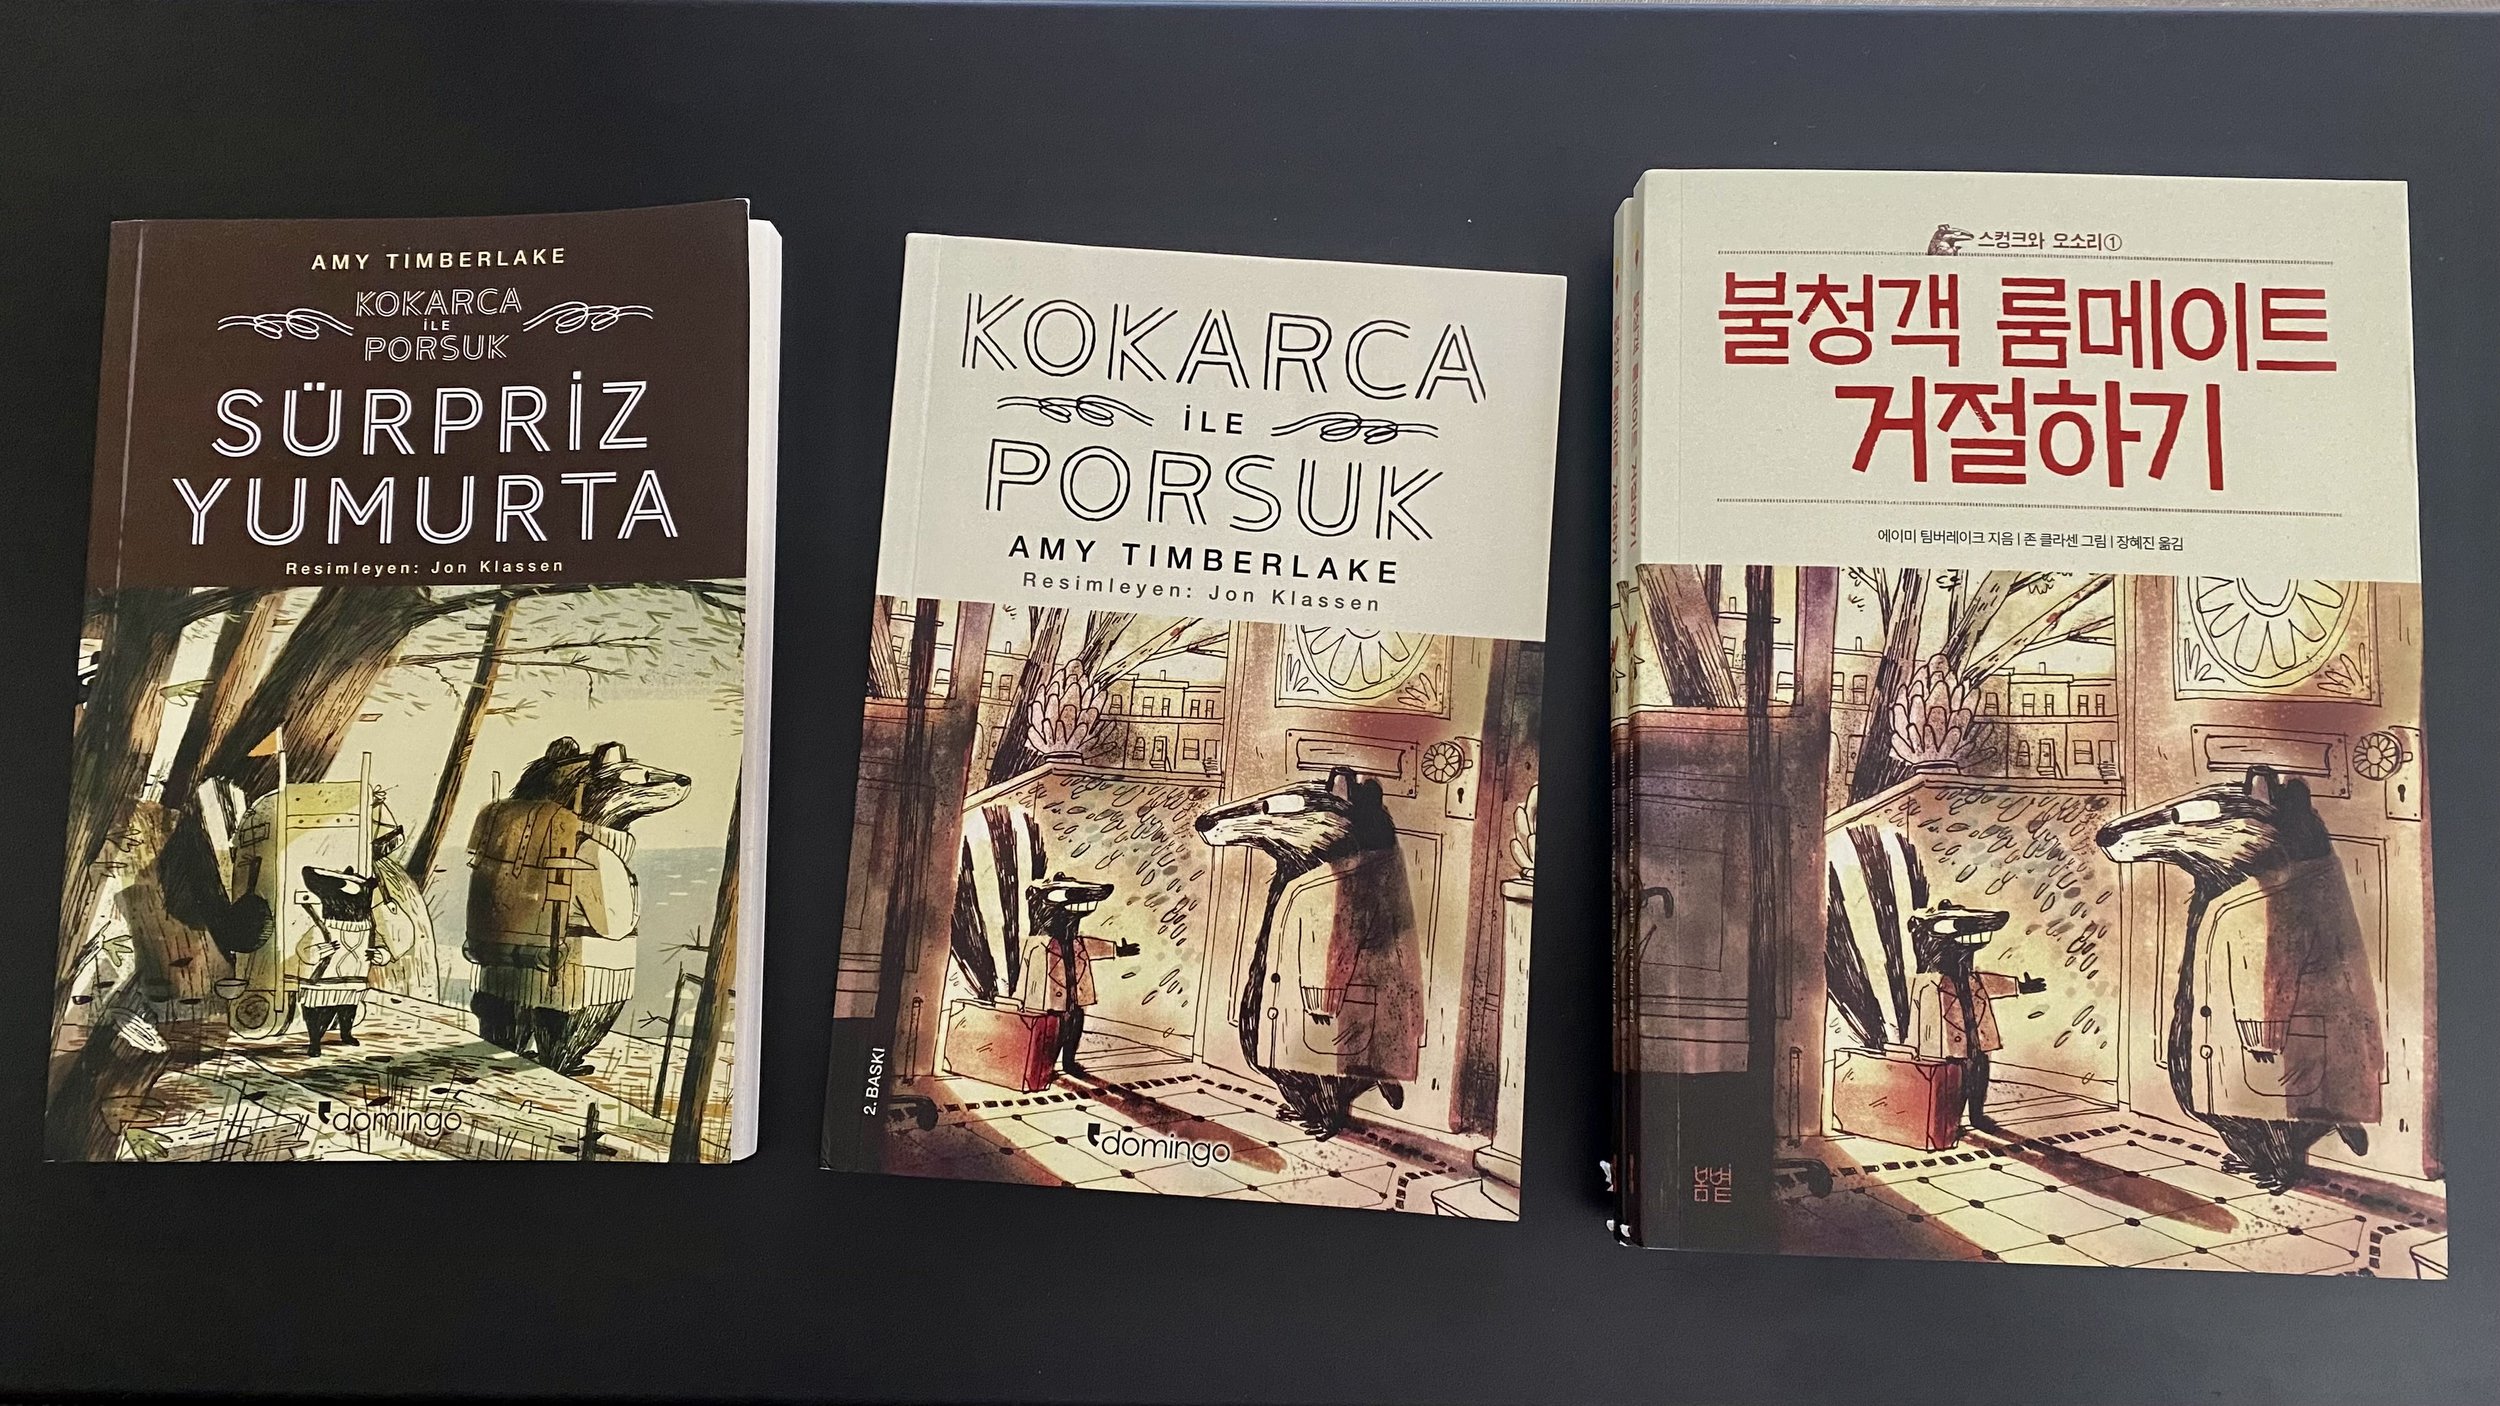 July 2023 -- The Korean and Turkish editions of Skunk and Badger! Yay!